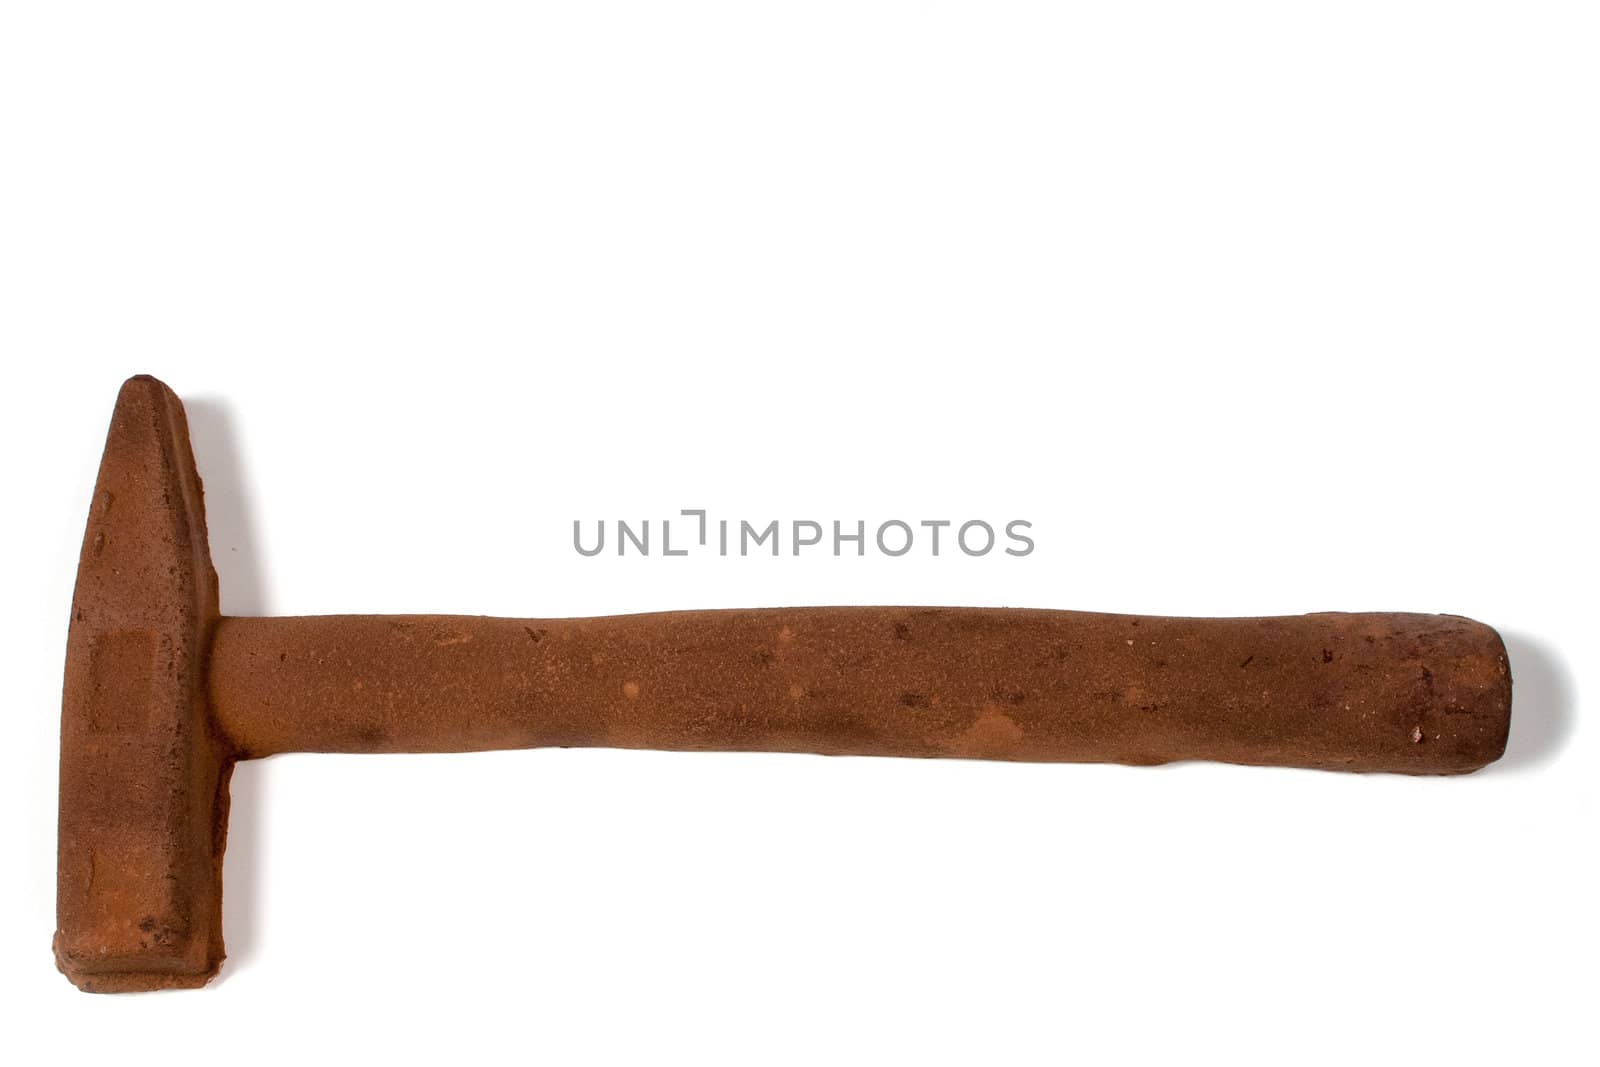 A chocolate hammer on a white background